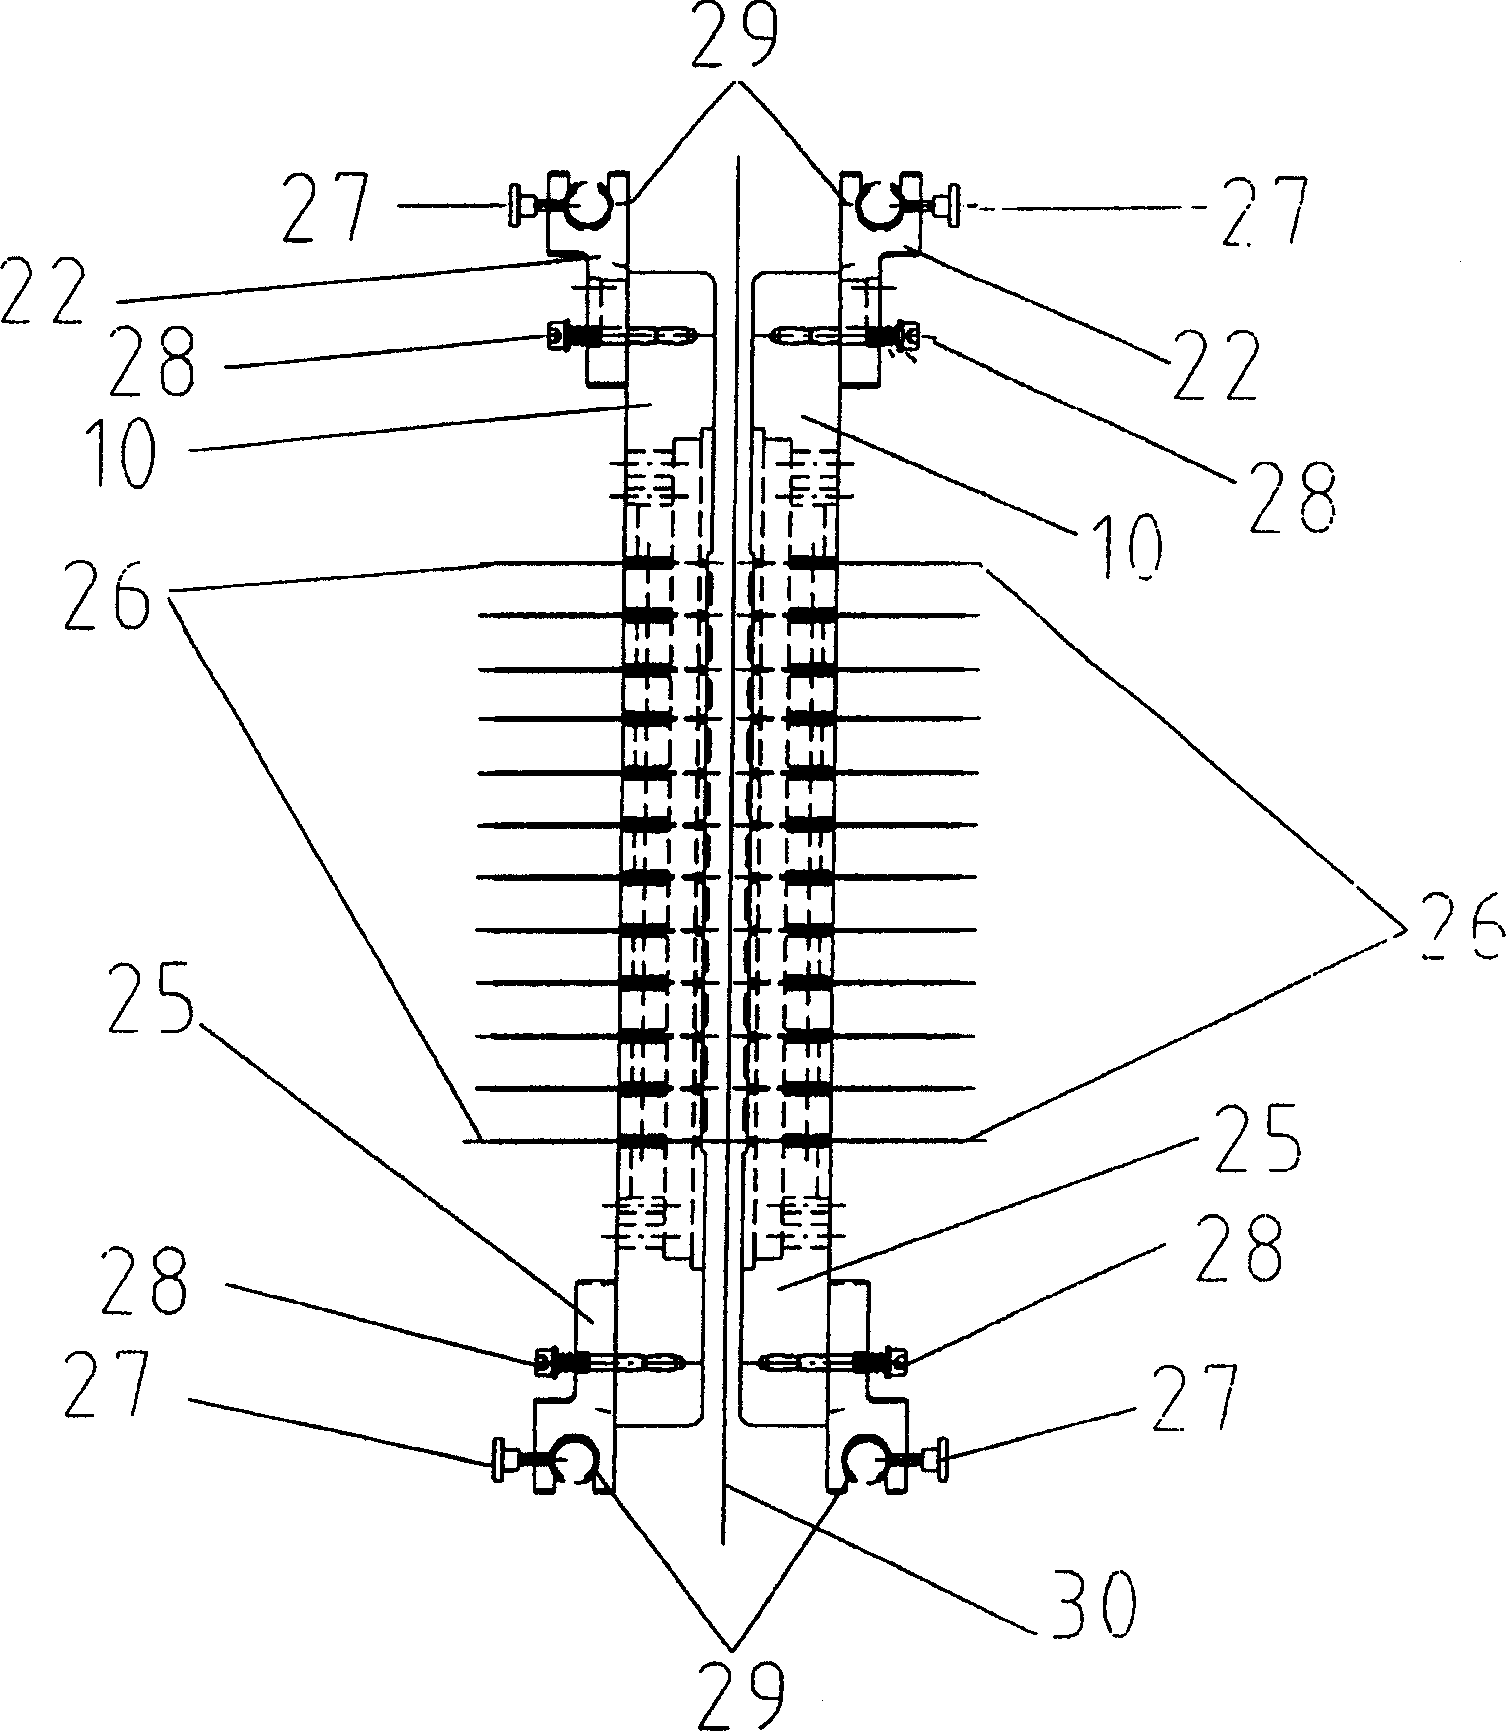 Multiple-unit drilling apparatus for wide breadth thin type base material